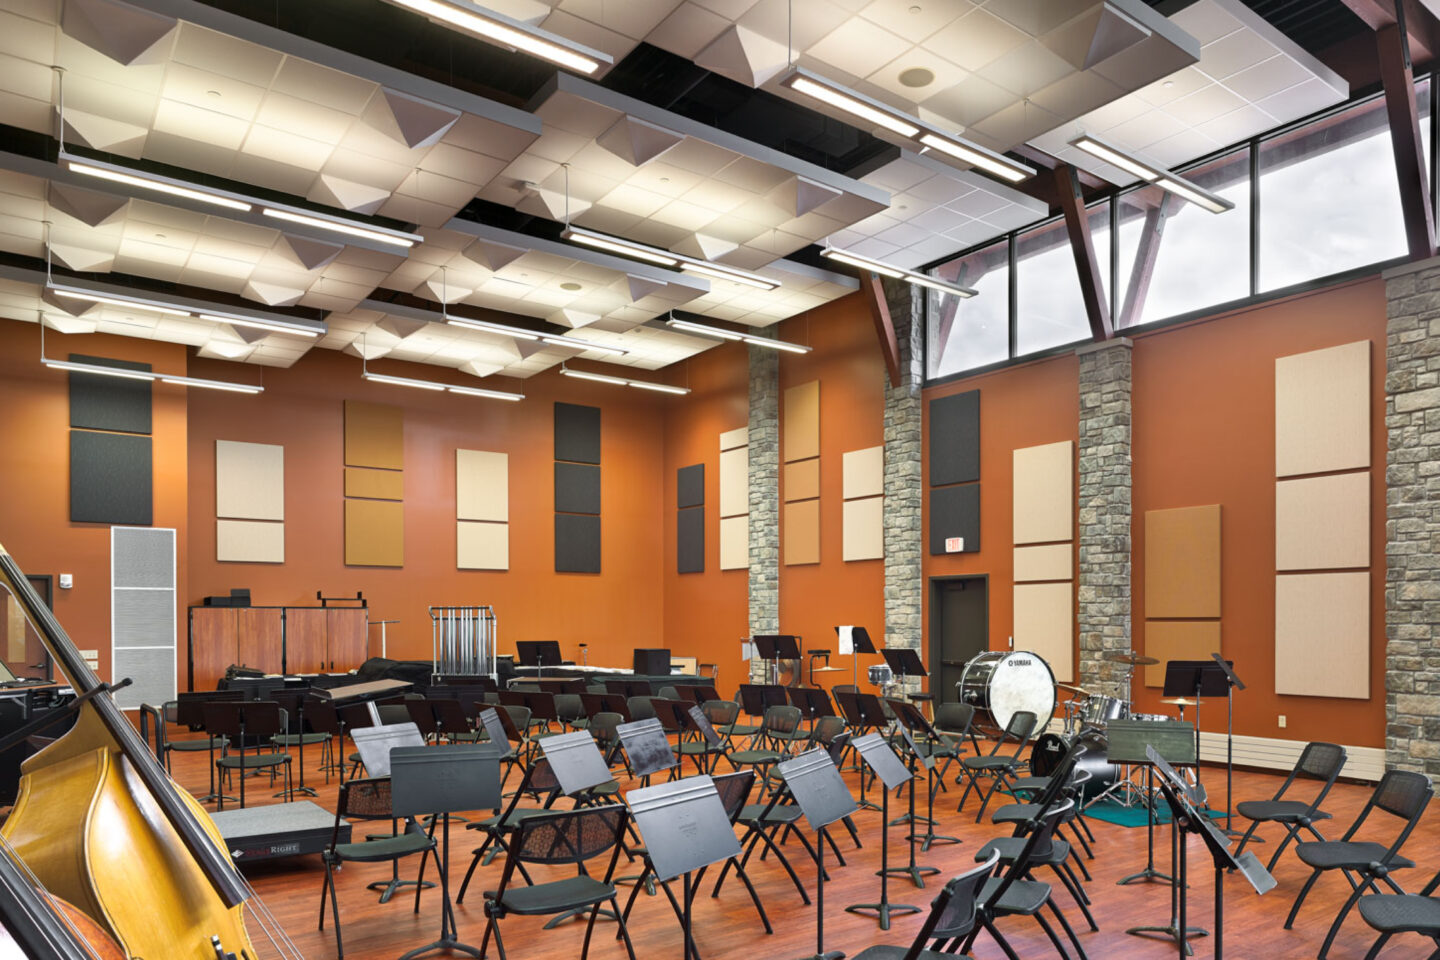 Silver Lake College Franciscan Center Practice Room designed by Bray Architects